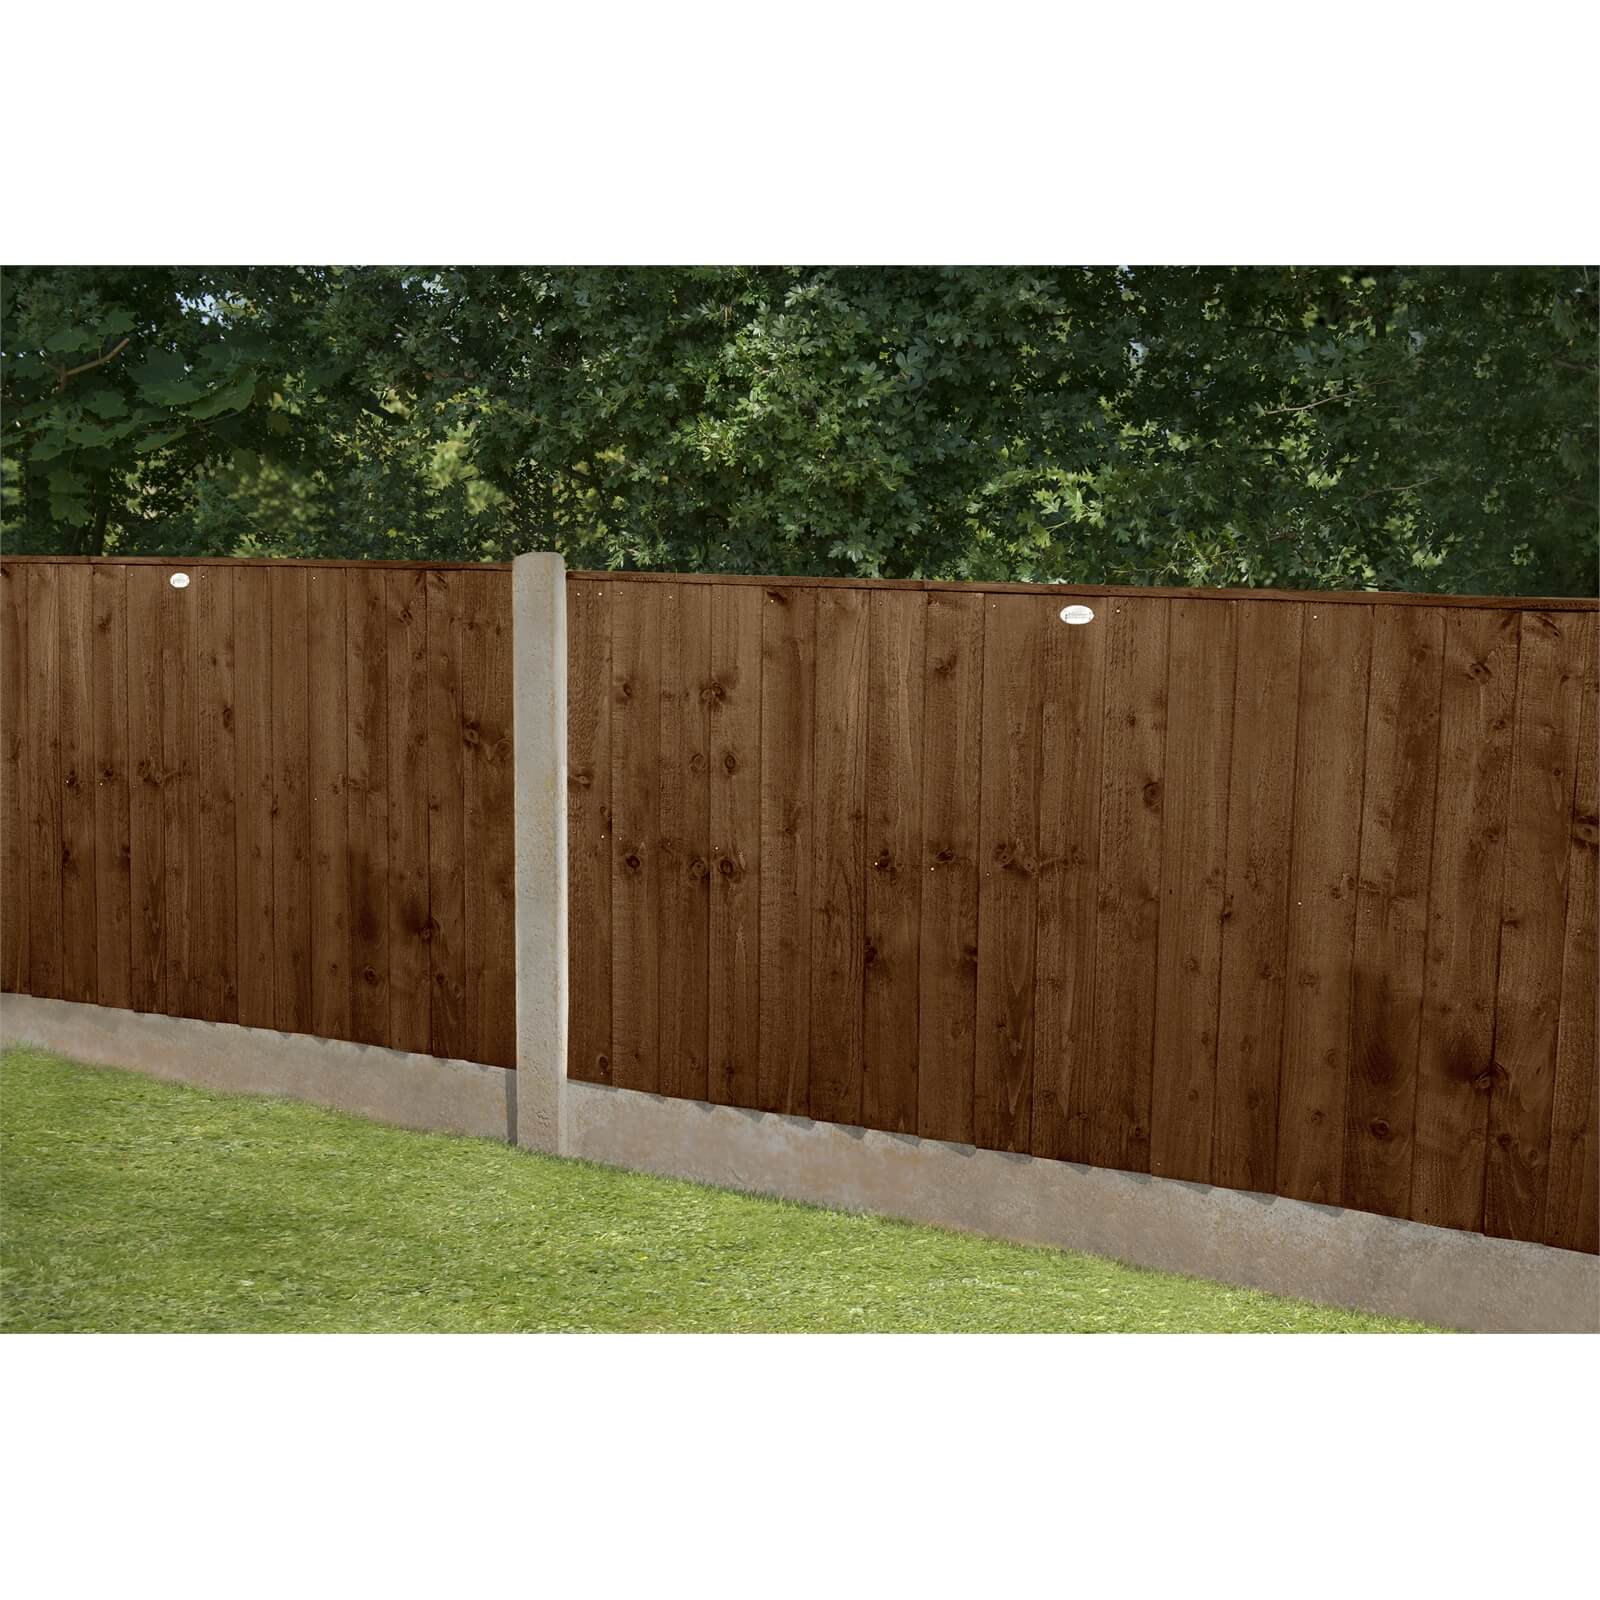 6ft x 3ft (1.83m x 0.93m) Pressure Treated Featheredge Fence Panel (Dark Brown) - Pack of 5